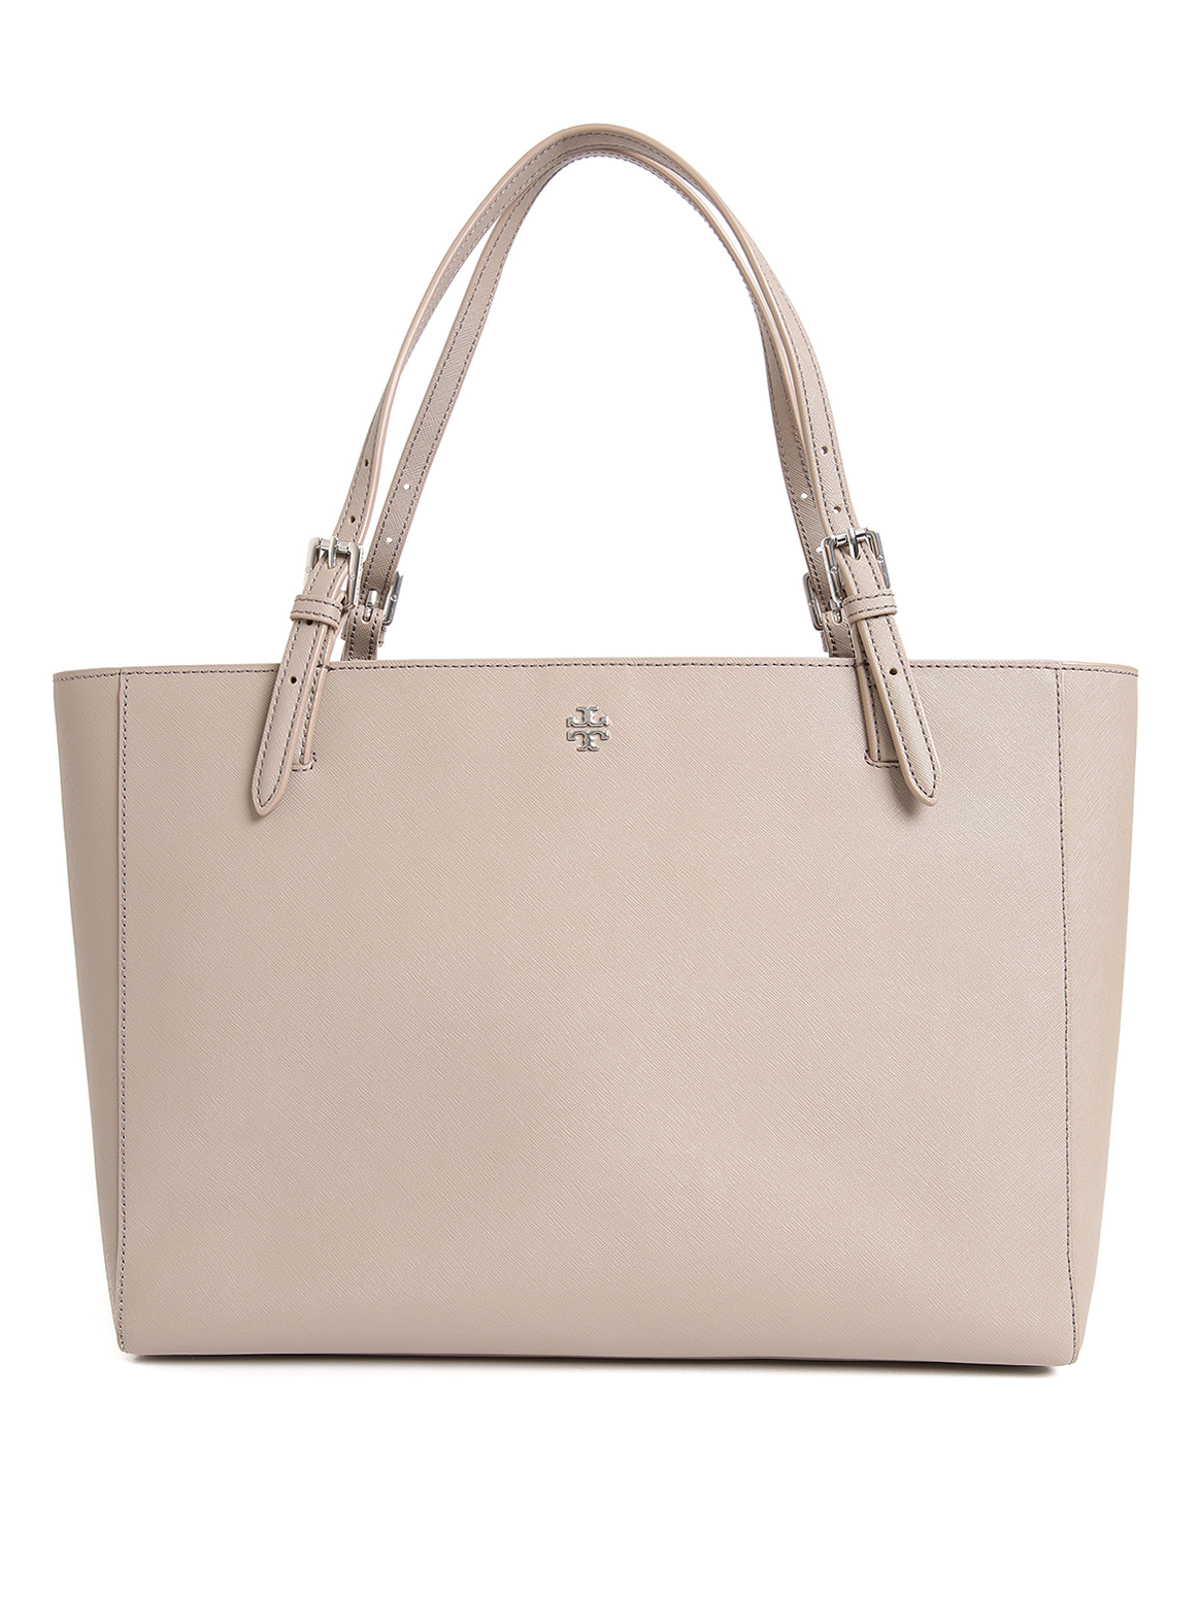 Tory Burch York BROWN Saffiano Leather Tote Bag (100